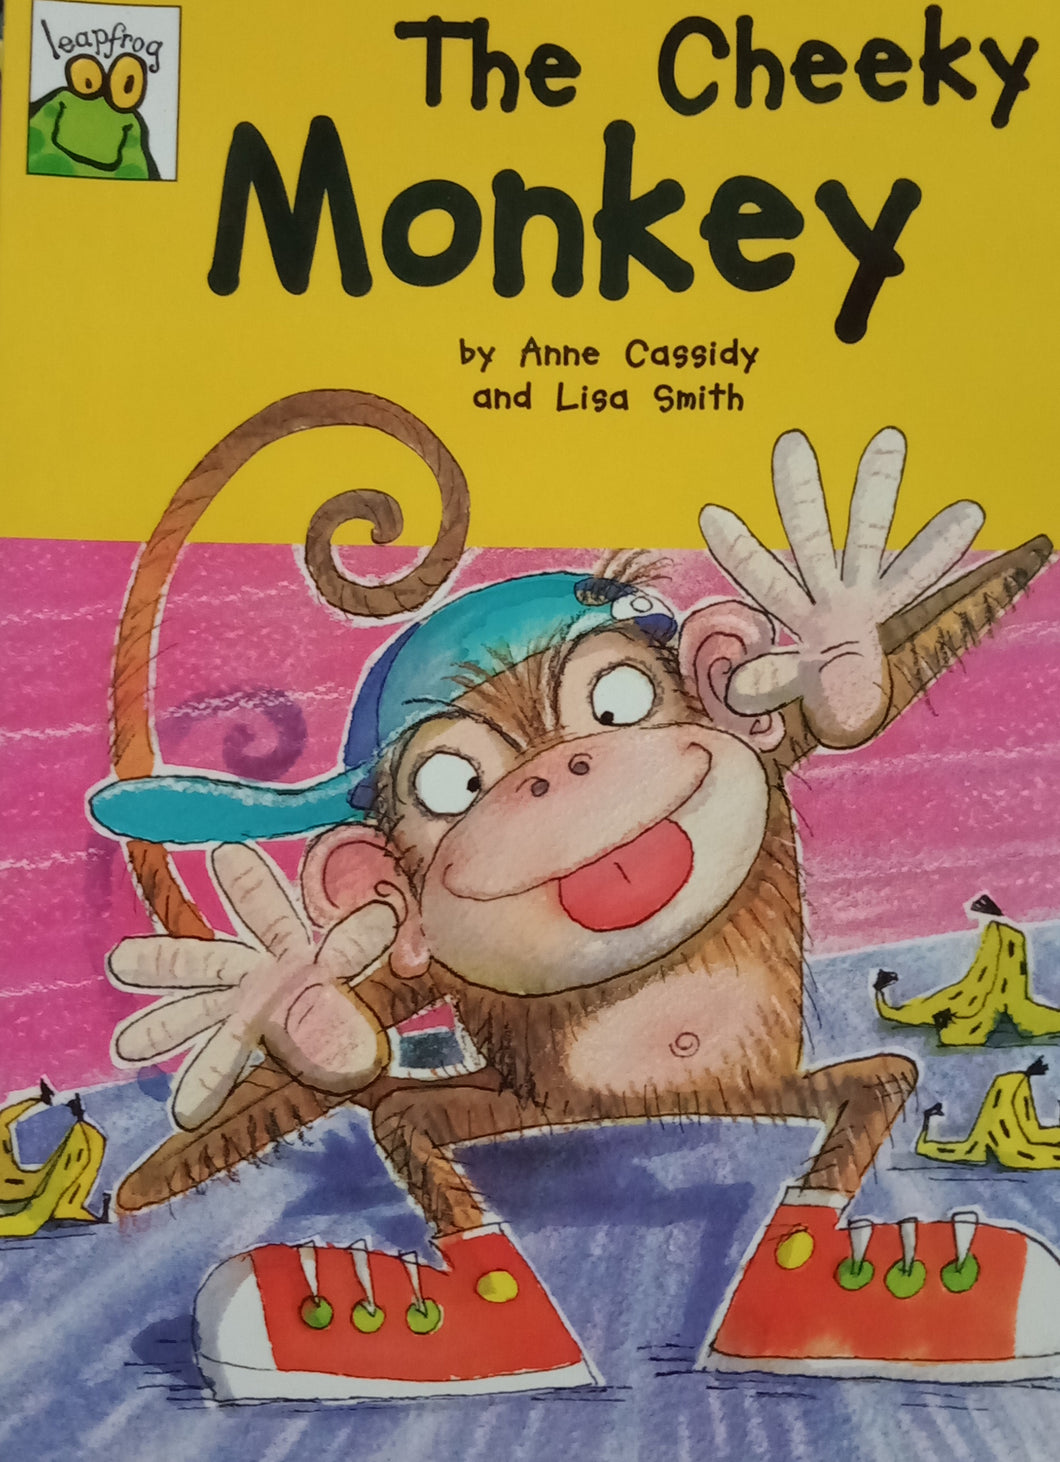 The Cheecky Monkey by Anne Cassidy